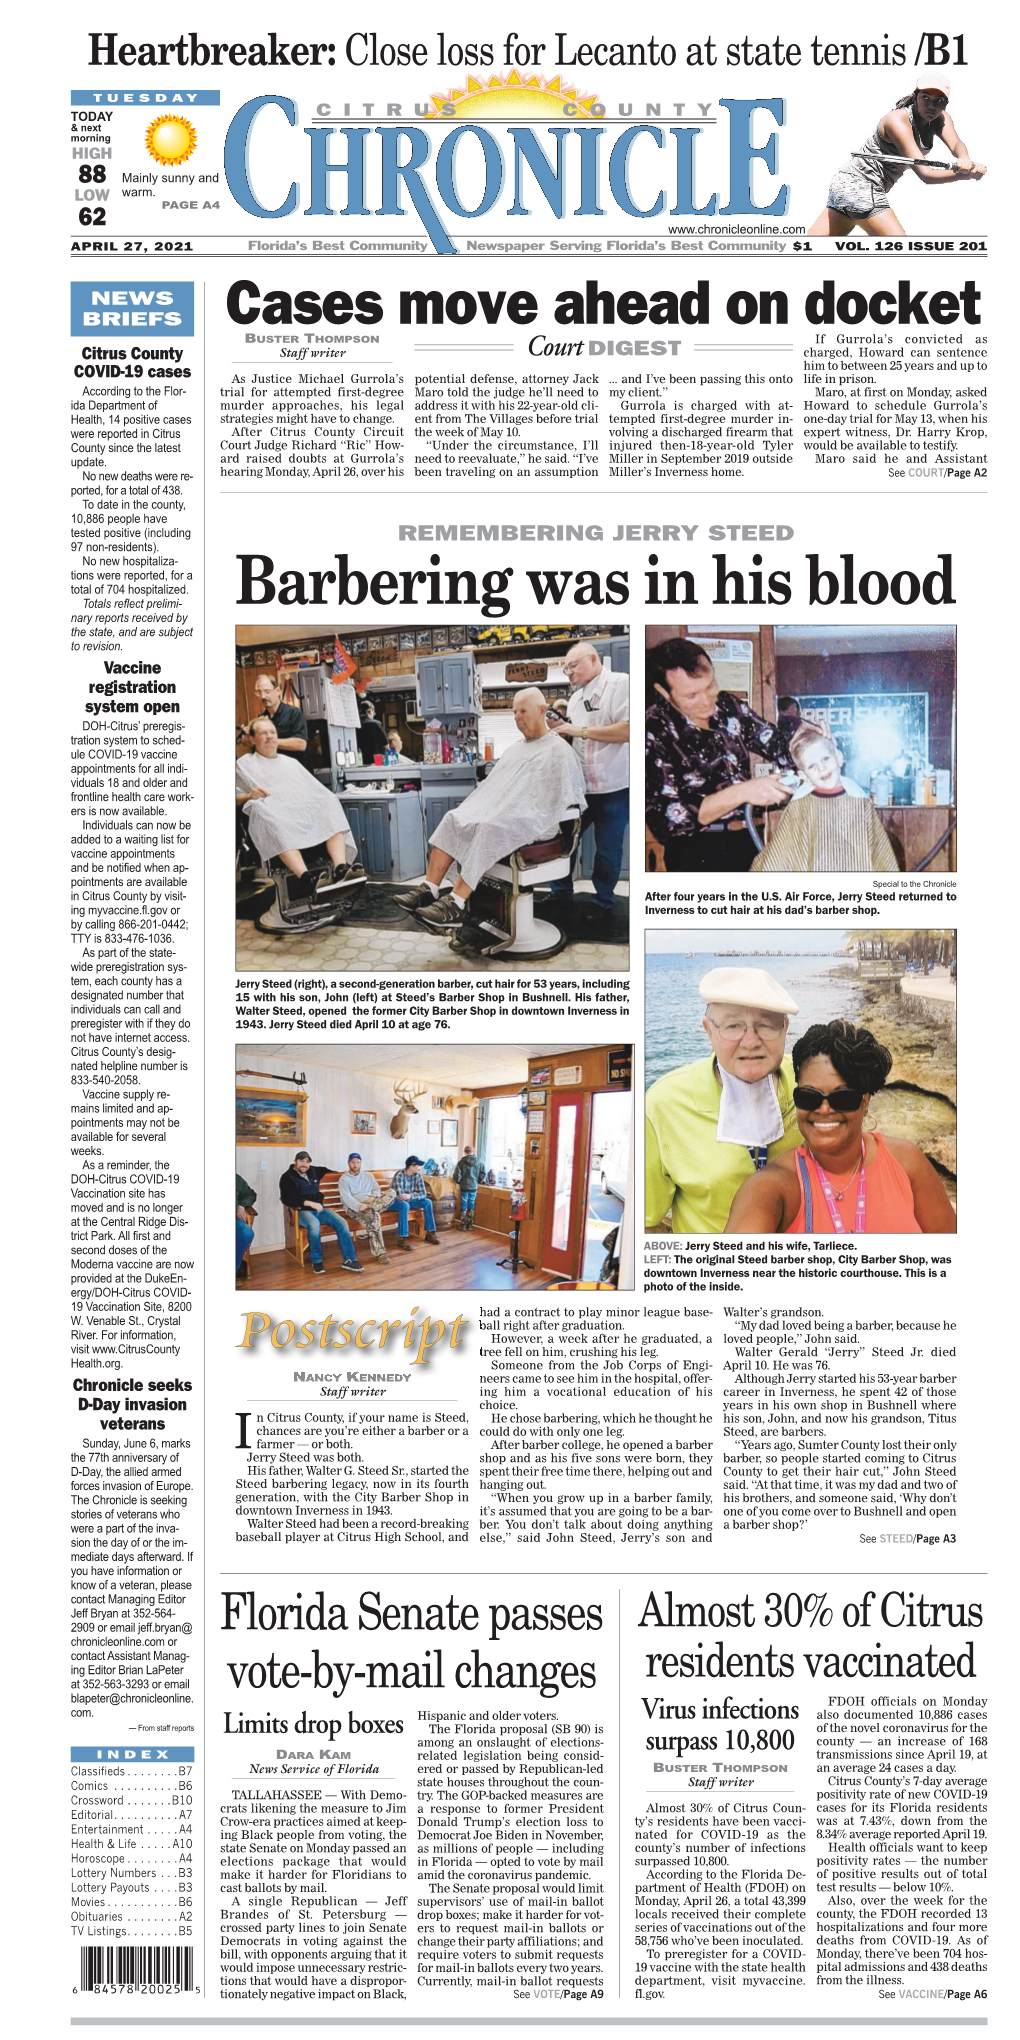 Barbering Was in His Blood Nary Reports Received by the State, and Are Subject to Revision